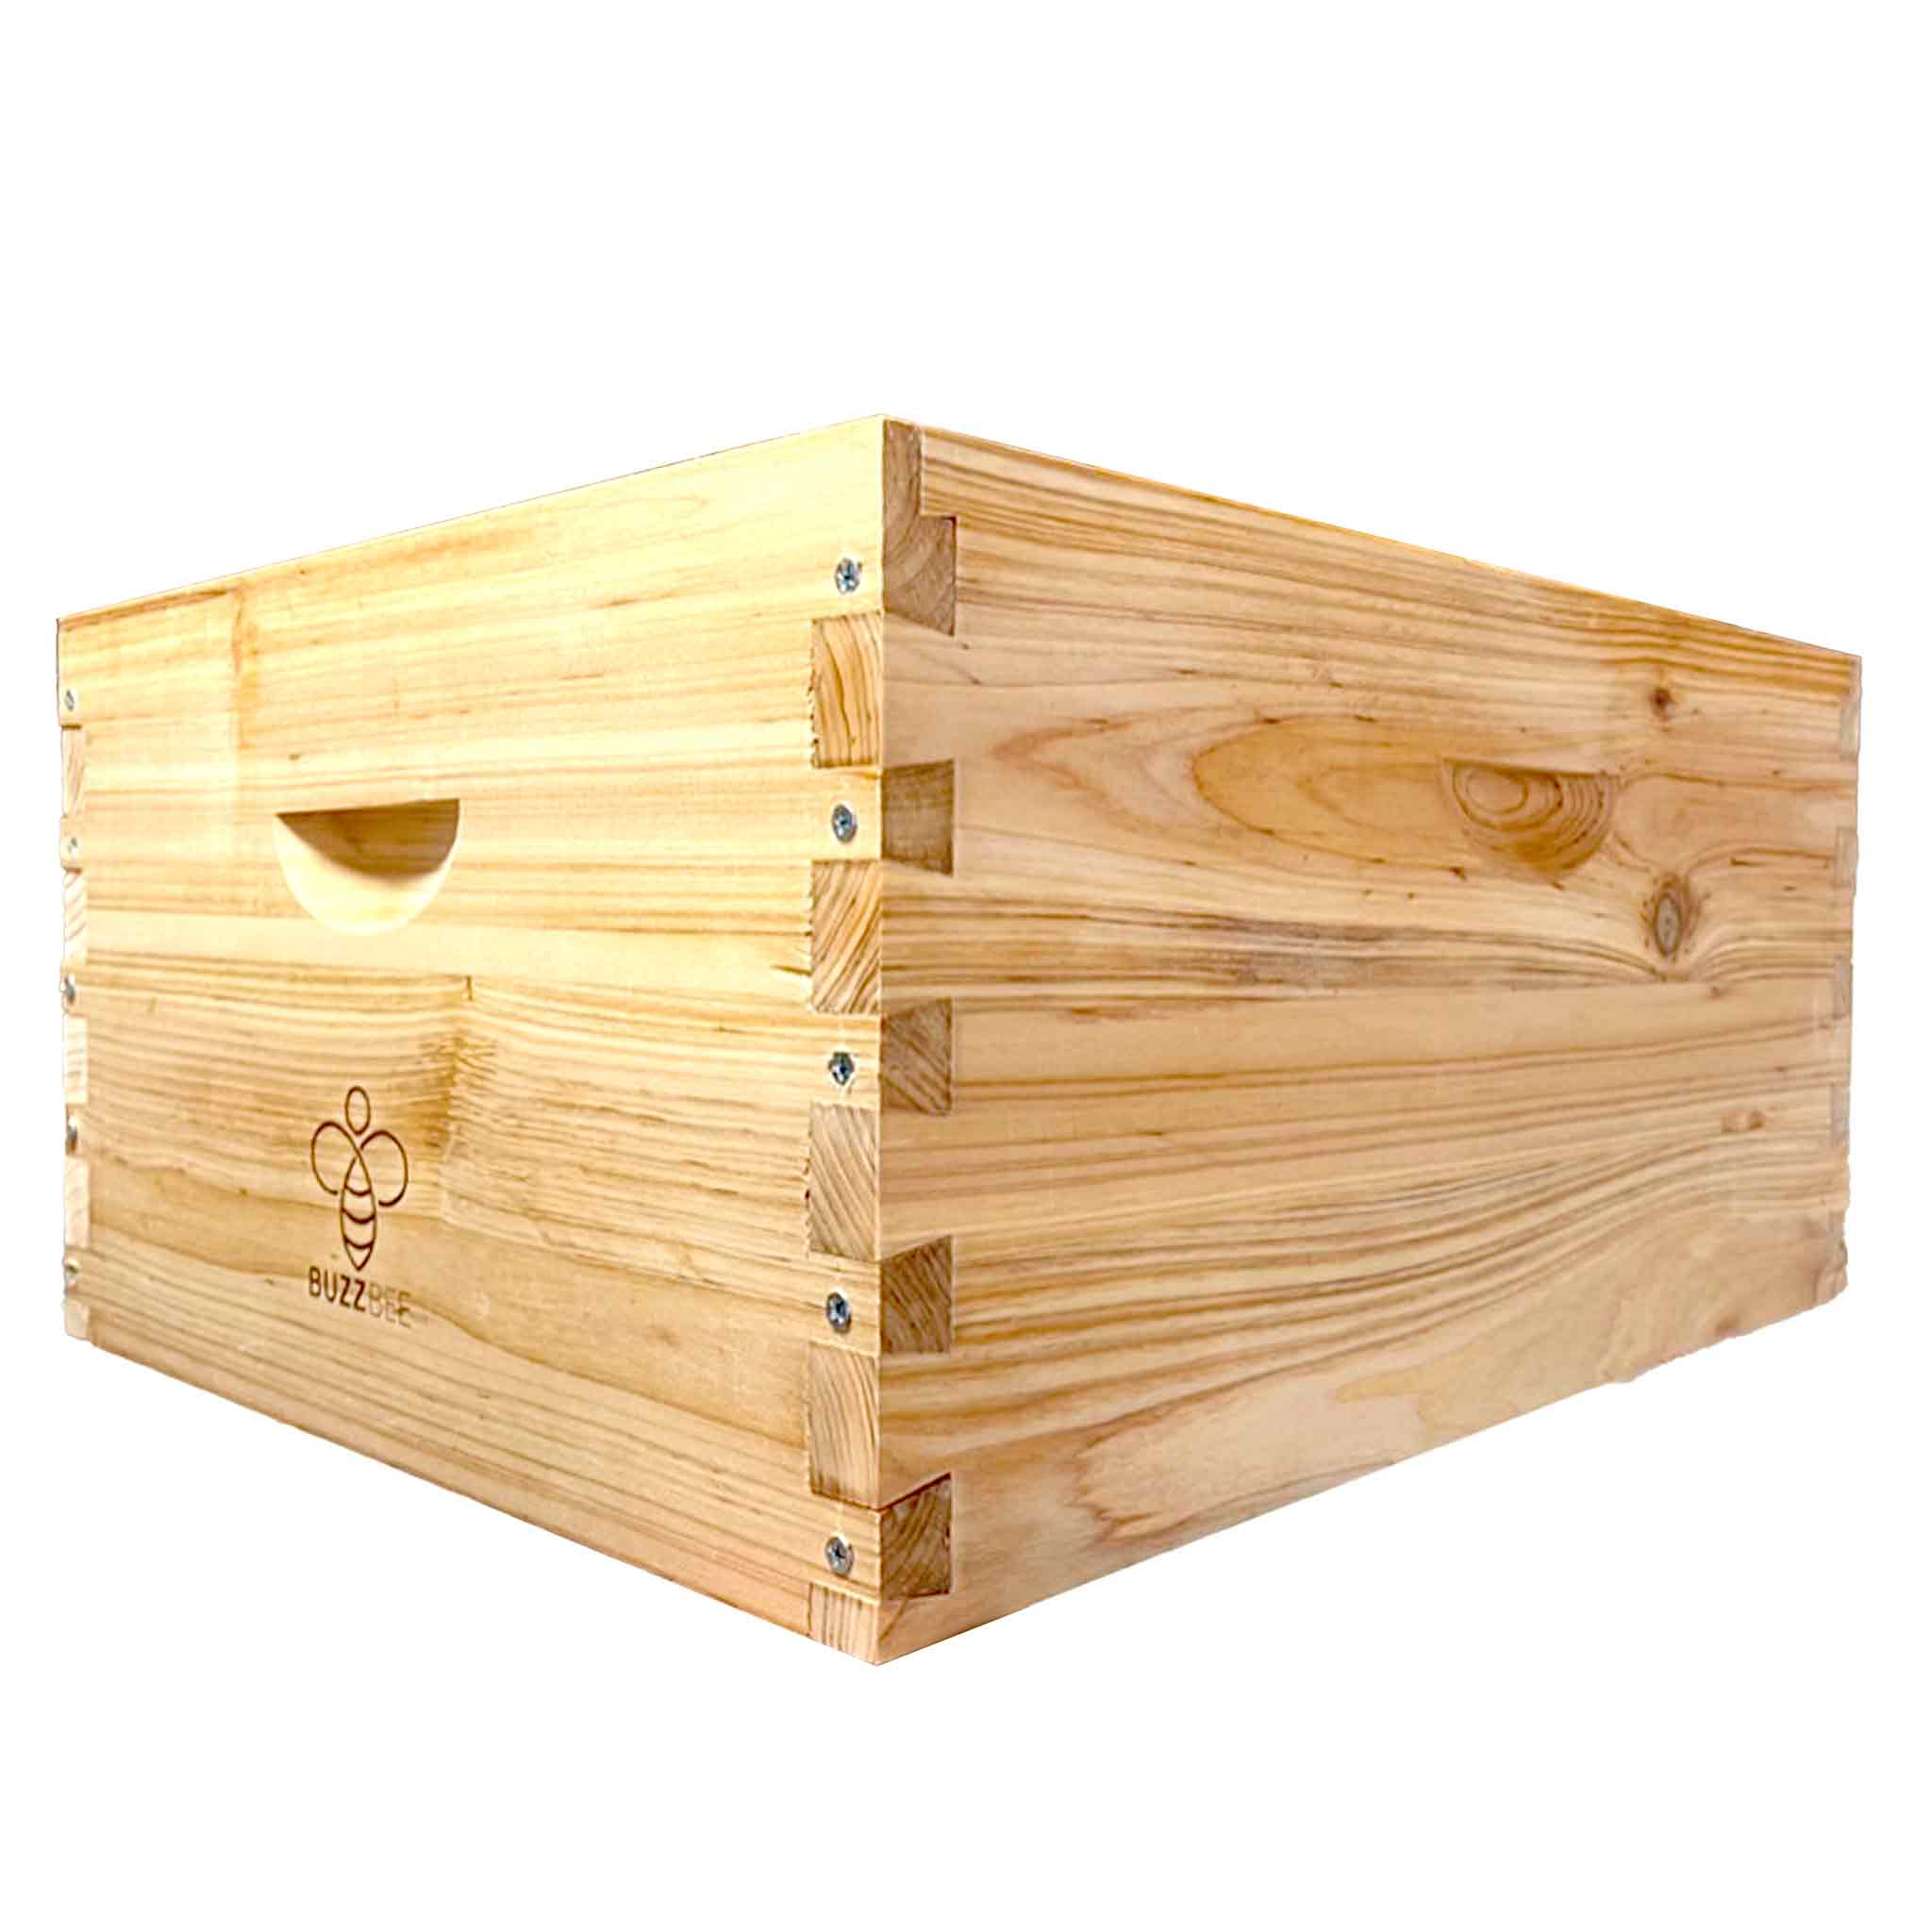 Commercial Hot Wax Dipped, Buzzbee Full Deep, Fir Super Box for Flow and Langstroth Beehives - Hive Parts collection by Buzzbee Beekeeping Supplies